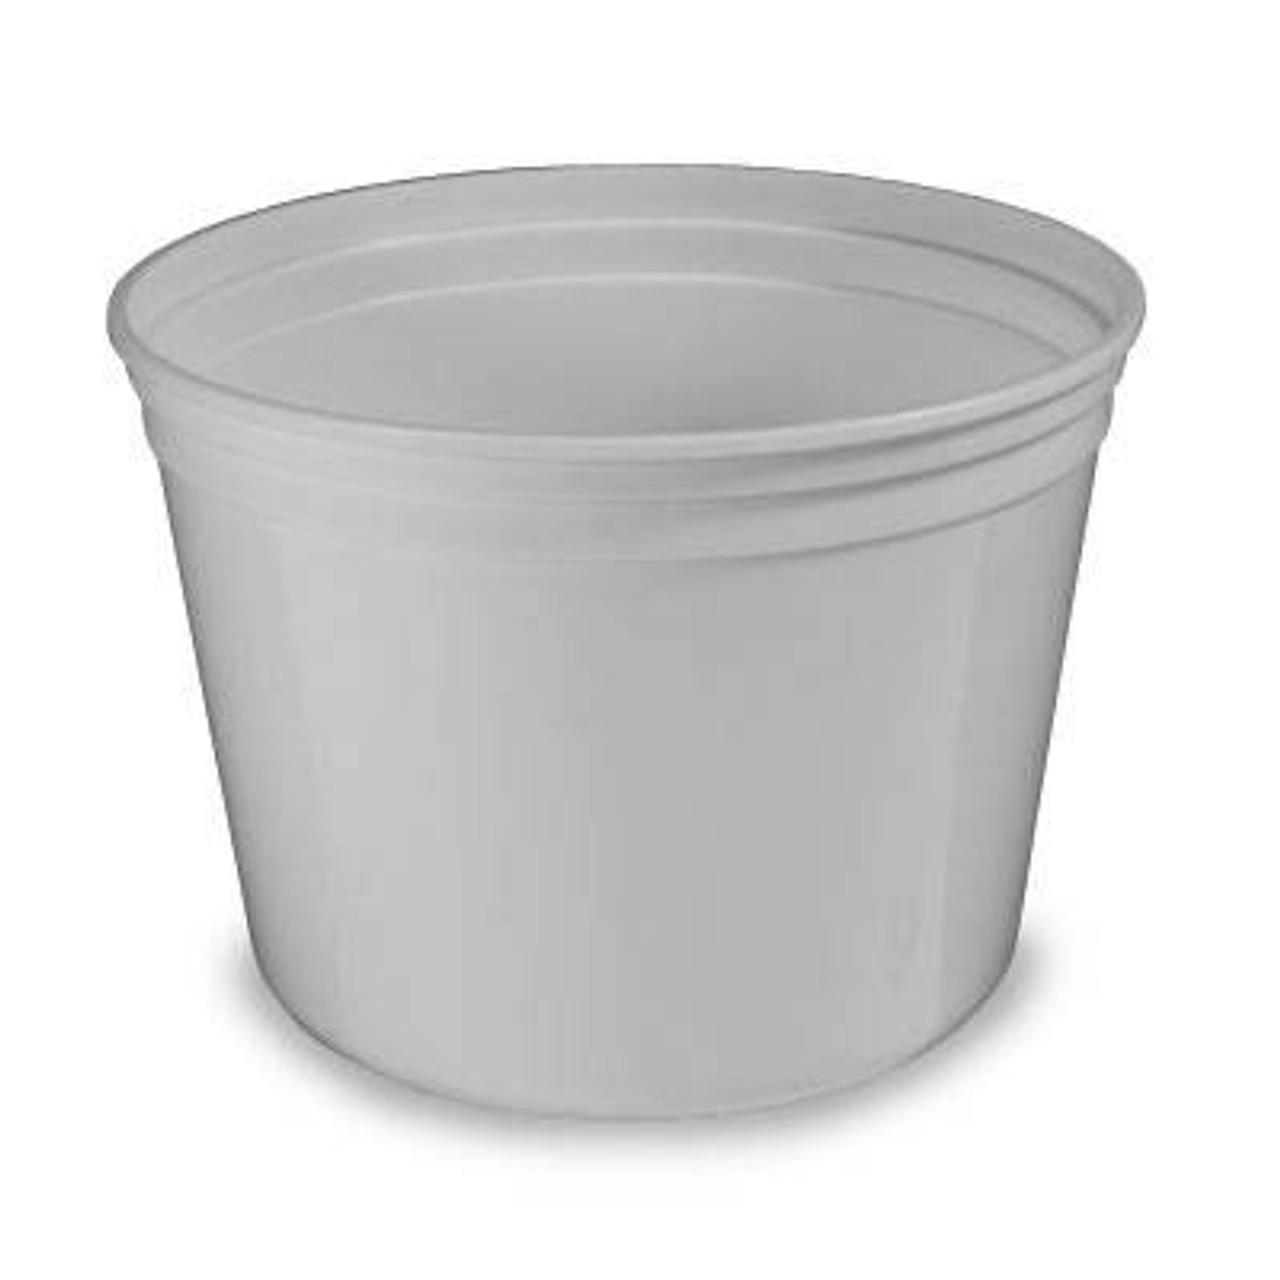 1.25 gal. BPA Free Food Grade Round Bucket with Lid (T808160B & L808) -  starting quantity 12 count - FREE SHIPPING - ePackageSupply